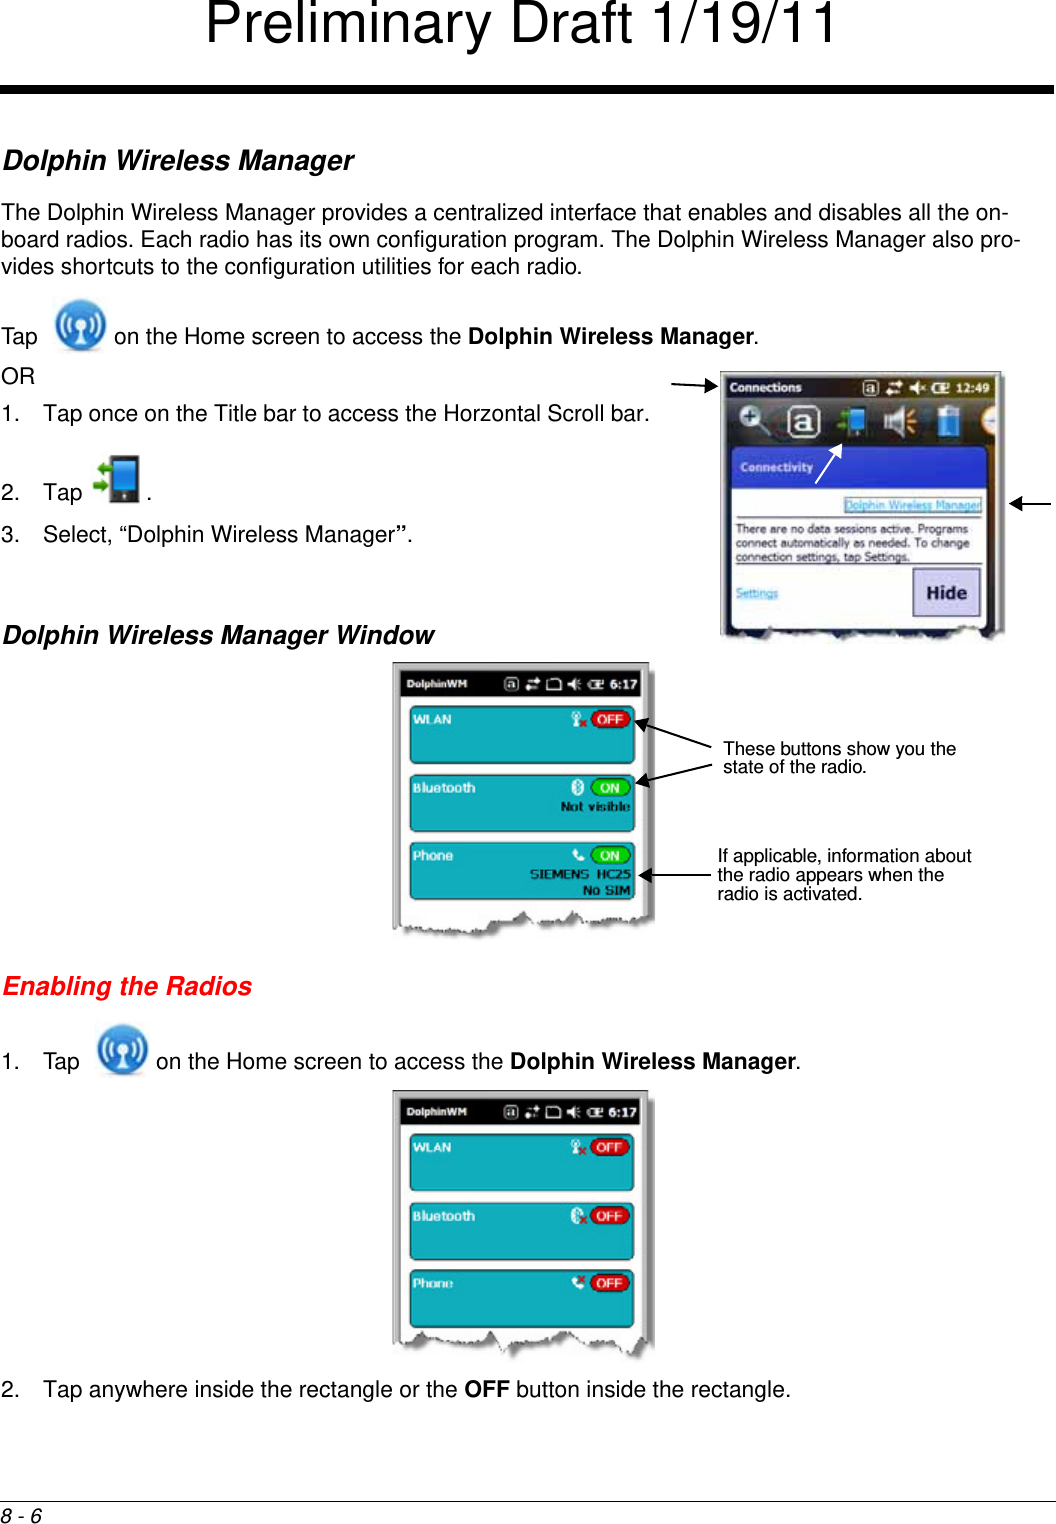 8 - 6Dolphin Wireless ManagerThe Dolphin Wireless Manager provides a centralized interface that enables and disables all the on-board radios. Each radio has its own configuration program. The Dolphin Wireless Manager also pro-vides shortcuts to the configuration utilities for each radio. Tap   on the Home screen to access the Dolphin Wireless Manager.OR 1. Tap once on the Title bar to access the Horzontal Scroll bar. 2. Tap . 3. Select, “Dolphin Wireless Manager”.Dolphin Wireless Manager WindowEnabling the Radios1. Tap   on the Home screen to access the Dolphin Wireless Manager.  2. Tap anywhere inside the rectangle or the OFF button inside the rectangle.If applicable, information about the radio appears when the radio is activated.These buttons show you the state of the radio.Preliminary Draft 1/19/11